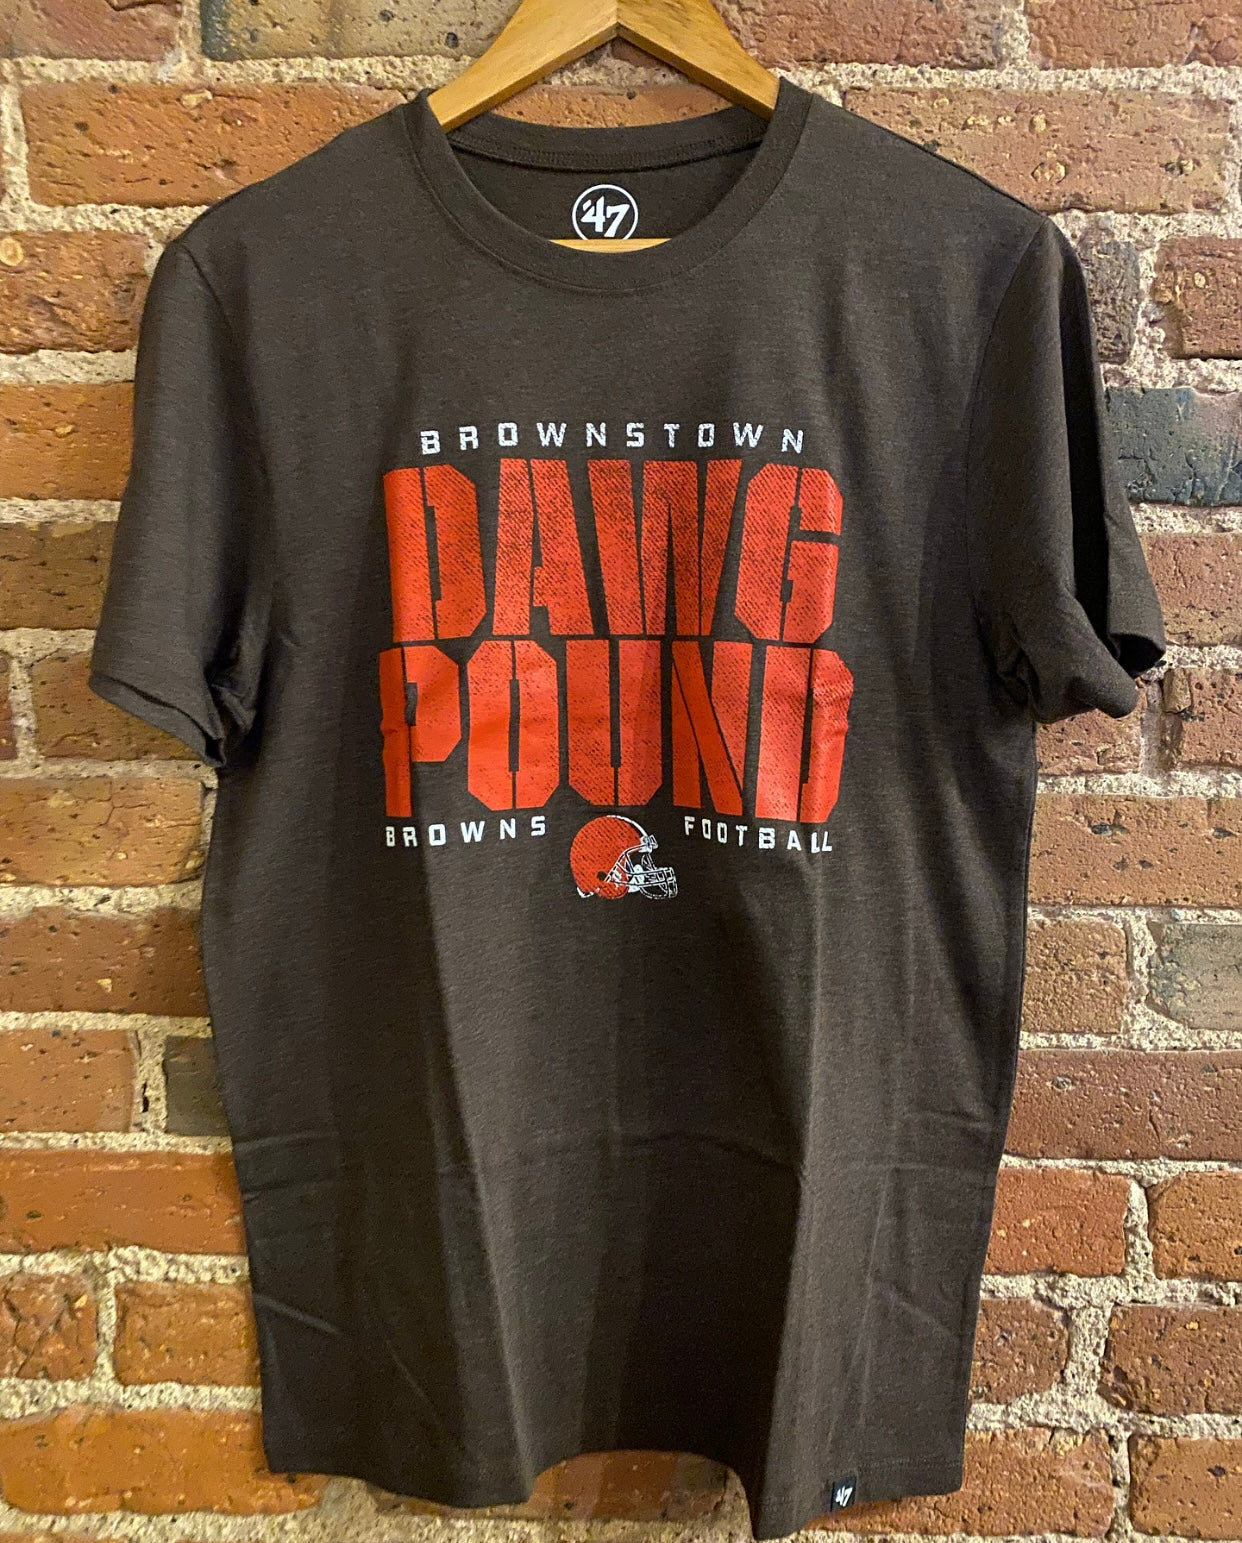 Cleveland Browns Dawg Pound T-Shirt - 47 Brand – The Vault